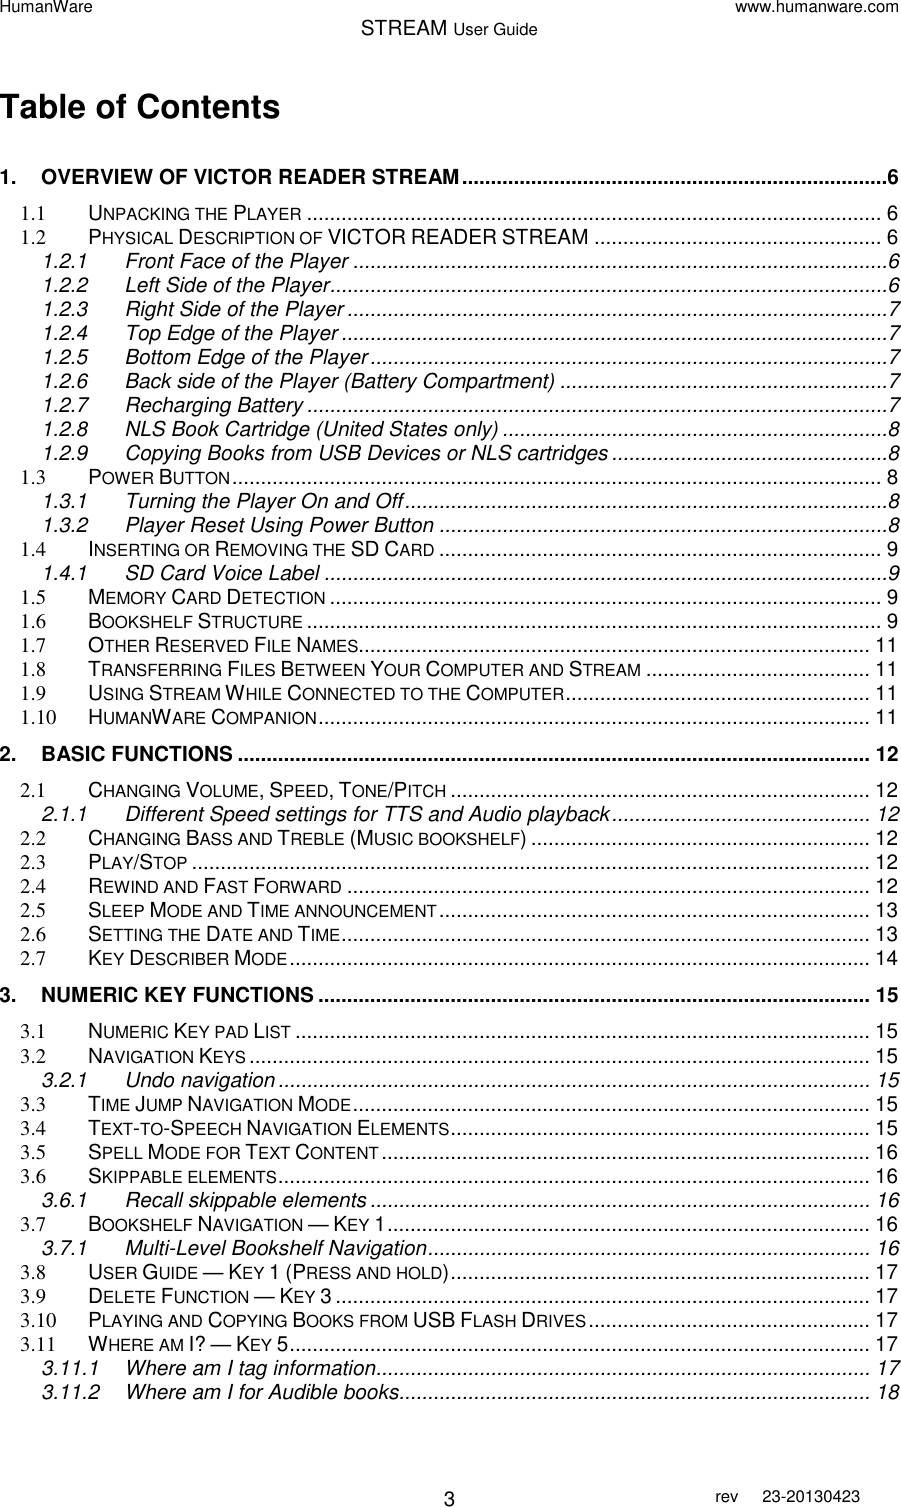 HumanWare www.humanware.com STREAM User Guide        3 rev  23-20130423   Table of Contents  1. OVERVIEW OF VICTOR READER STREAM ..........................................................................6 1.1 UNPACKING THE PLAYER .................................................................................................... 6 1.2 PHYSICAL DESCRIPTION OF VICTOR READER STREAM .................................................. 6 1.2.1 Front Face of the Player .............................................................................................6 1.2.2 Left Side of the Player .................................................................................................6 1.2.3 Right Side of the Player ..............................................................................................7 1.2.4 Top Edge of the Player ...............................................................................................7 1.2.5 Bottom Edge of the Player ..........................................................................................7 1.2.6 Back side of the Player (Battery Compartment) .........................................................7 1.2.7 Recharging Battery .....................................................................................................7 1.2.8 NLS Book Cartridge (United States only) ...................................................................8 1.2.9 Copying Books from USB Devices or NLS cartridges ................................................8 1.3 POWER BUTTON ................................................................................................................. 8 1.3.1 Turning the Player On and Off ....................................................................................8 1.3.2 Player Reset Using Power Button ..............................................................................8 1.4 INSERTING OR REMOVING THE SD CARD ............................................................................. 9 1.4.1 SD Card Voice Label ..................................................................................................9 1.5 MEMORY CARD DETECTION ................................................................................................ 9 1.6 BOOKSHELF STRUCTURE .................................................................................................... 9 1.7 OTHER RESERVED FILE NAMES......................................................................................... 11 1.8 TRANSFERRING FILES BETWEEN YOUR COMPUTER AND STREAM ....................................... 11 1.9 USING STREAM WHILE CONNECTED TO THE COMPUTER ..................................................... 11 1.10 HUMANWARE COMPANION ................................................................................................ 11 2. BASIC FUNCTIONS .............................................................................................................. 12 2.1 CHANGING VOLUME, SPEED, TONE/PITCH ......................................................................... 12 2.1.1 Different Speed settings for TTS and Audio playback ............................................. 12 2.2 CHANGING BASS AND TREBLE (MUSIC BOOKSHELF) ........................................................... 12 2.3 PLAY/STOP ...................................................................................................................... 12 2.4 REWIND AND FAST FORWARD ........................................................................................... 12 2.5 SLEEP MODE AND TIME ANNOUNCEMENT ........................................................................... 13 2.6 SETTING THE DATE AND TIME ............................................................................................ 13 2.7 KEY DESCRIBER MODE ..................................................................................................... 14 3. NUMERIC KEY FUNCTIONS ................................................................................................ 15 3.1 NUMERIC KEY PAD LIST .................................................................................................... 15 3.2 NAVIGATION KEYS ............................................................................................................ 15 3.2.1 Undo navigation ....................................................................................................... 15 3.3 TIME JUMP NAVIGATION MODE .......................................................................................... 15 3.4 TEXT-TO-SPEECH NAVIGATION ELEMENTS ......................................................................... 15 3.5 SPELL MODE FOR TEXT CONTENT ..................................................................................... 16 3.6 SKIPPABLE ELEMENTS ....................................................................................................... 16 3.6.1 Recall skippable elements ....................................................................................... 16 3.7 BOOKSHELF NAVIGATION — KEY 1 .................................................................................... 16 3.7.1 Multi-Level Bookshelf Navigation ............................................................................. 16 3.8 USER GUIDE — KEY 1 (PRESS AND HOLD) ......................................................................... 17 3.9 DELETE FUNCTION — KEY 3 ............................................................................................. 17 3.10 PLAYING AND COPYING BOOKS FROM USB FLASH DRIVES ................................................. 17 3.11 WHERE AM I? — KEY 5 ..................................................................................................... 17 3.11.1 Where am I tag information...................................................................................... 17 3.11.2 Where am I for Audible books.................................................................................. 18 